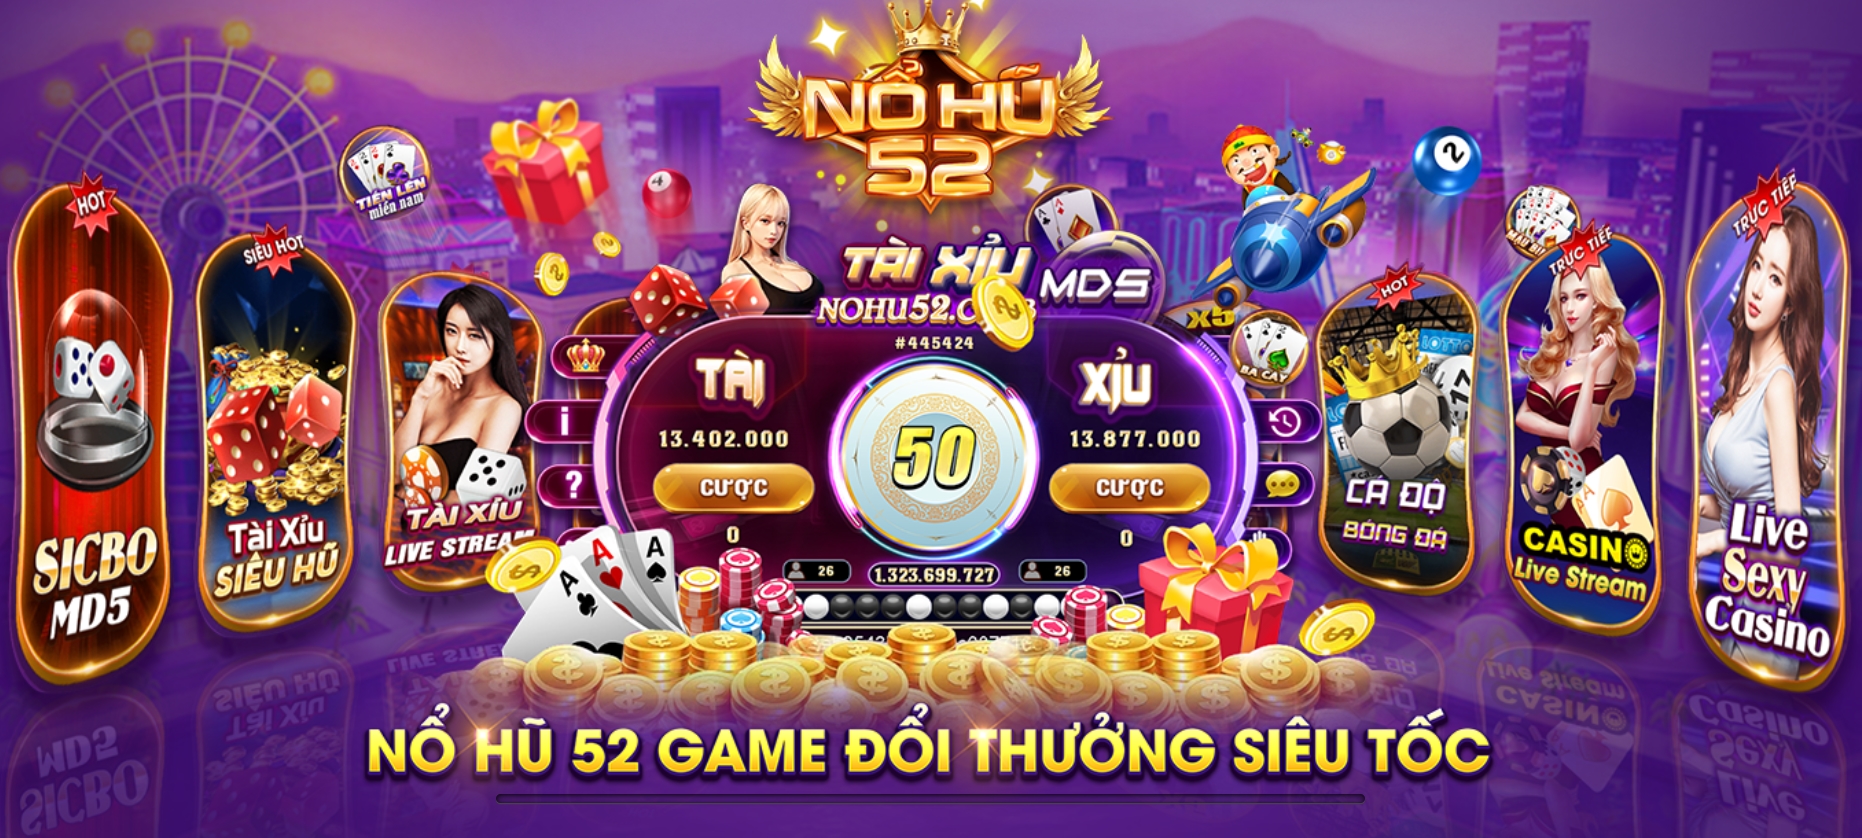 Review cổng game Nohu52.club